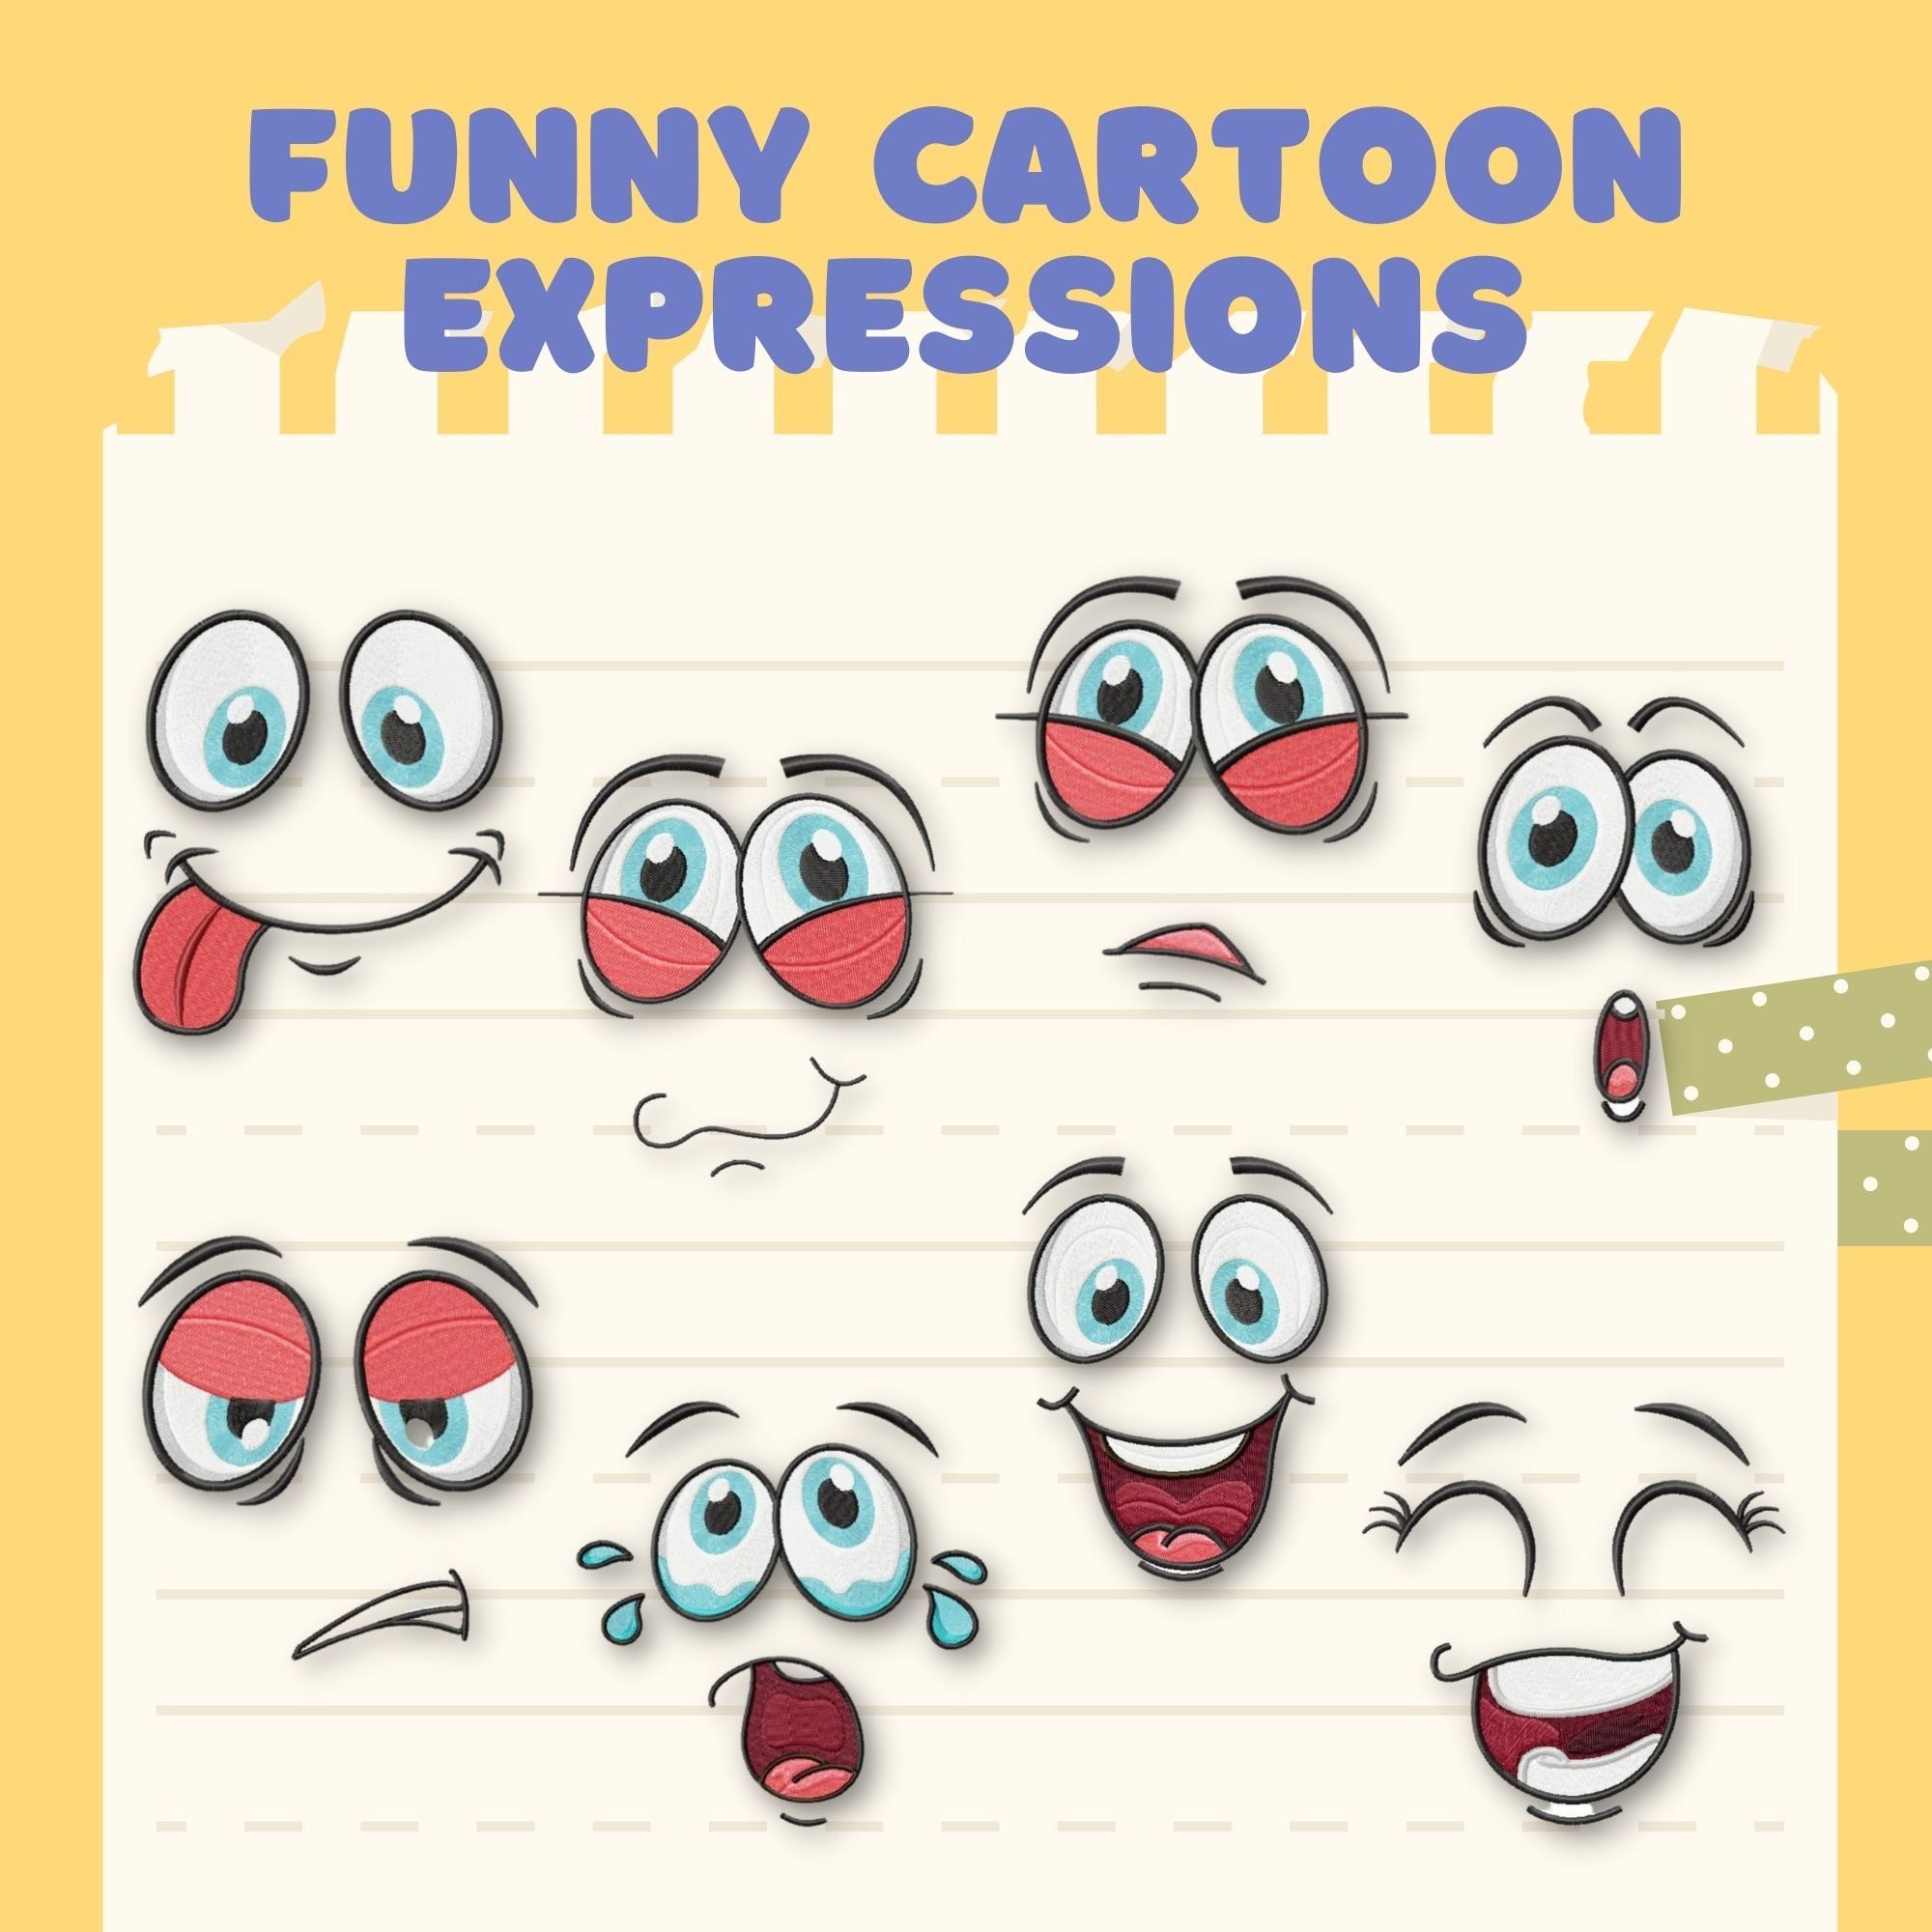 Funny scared face expression cartoon illustration Poster for Sale